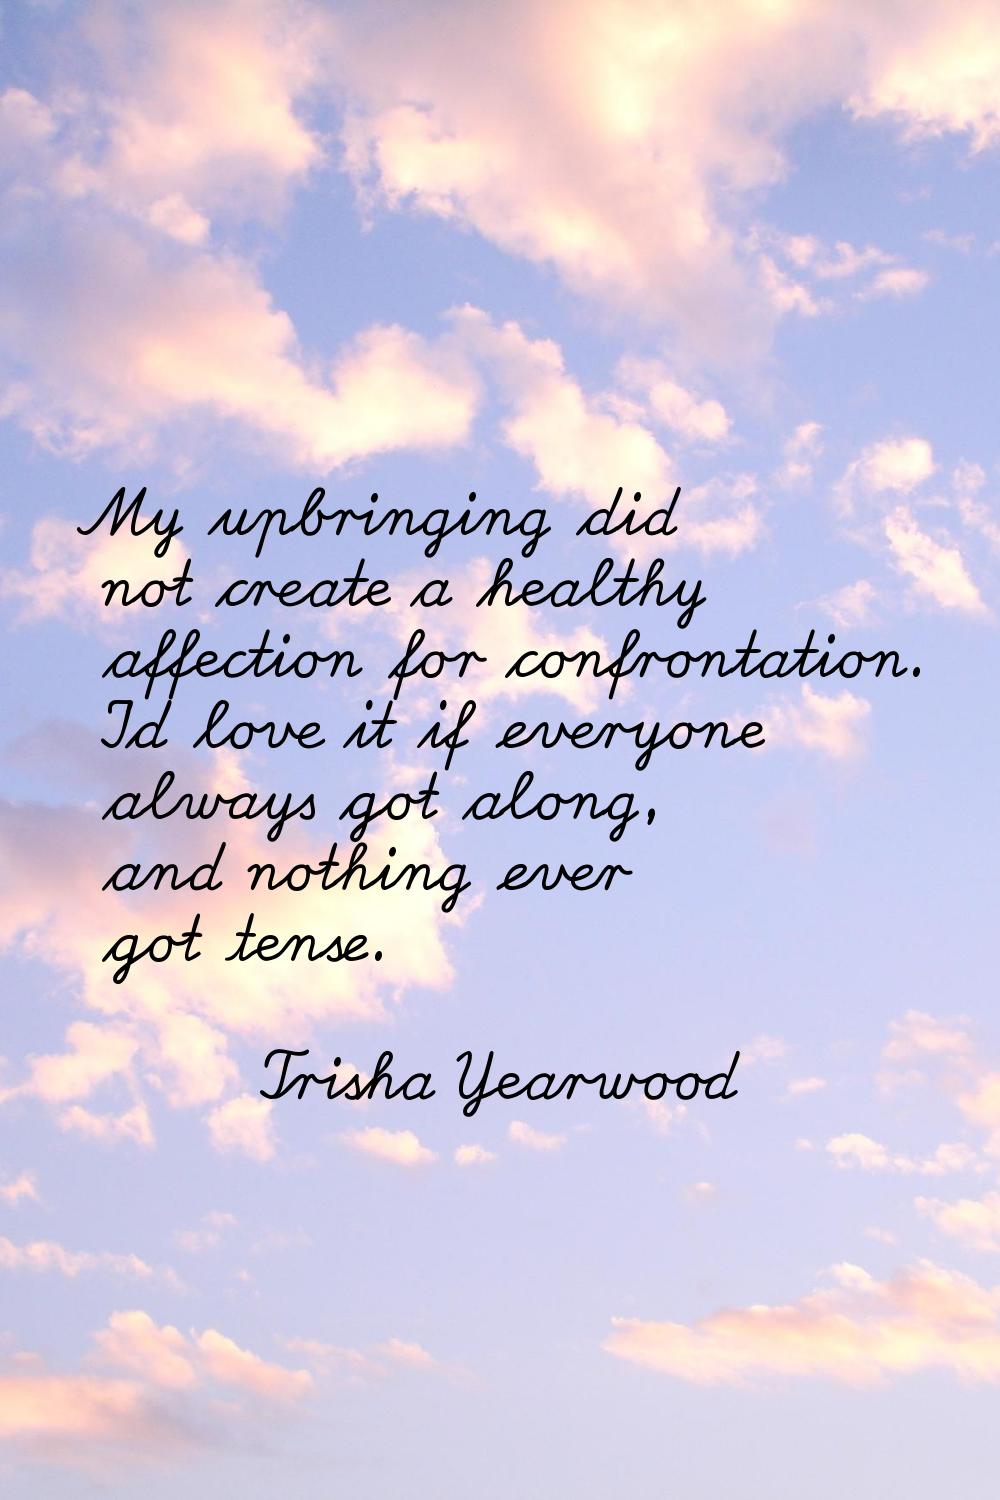 My upbringing did not create a healthy affection for confrontation. I'd love it if everyone always 